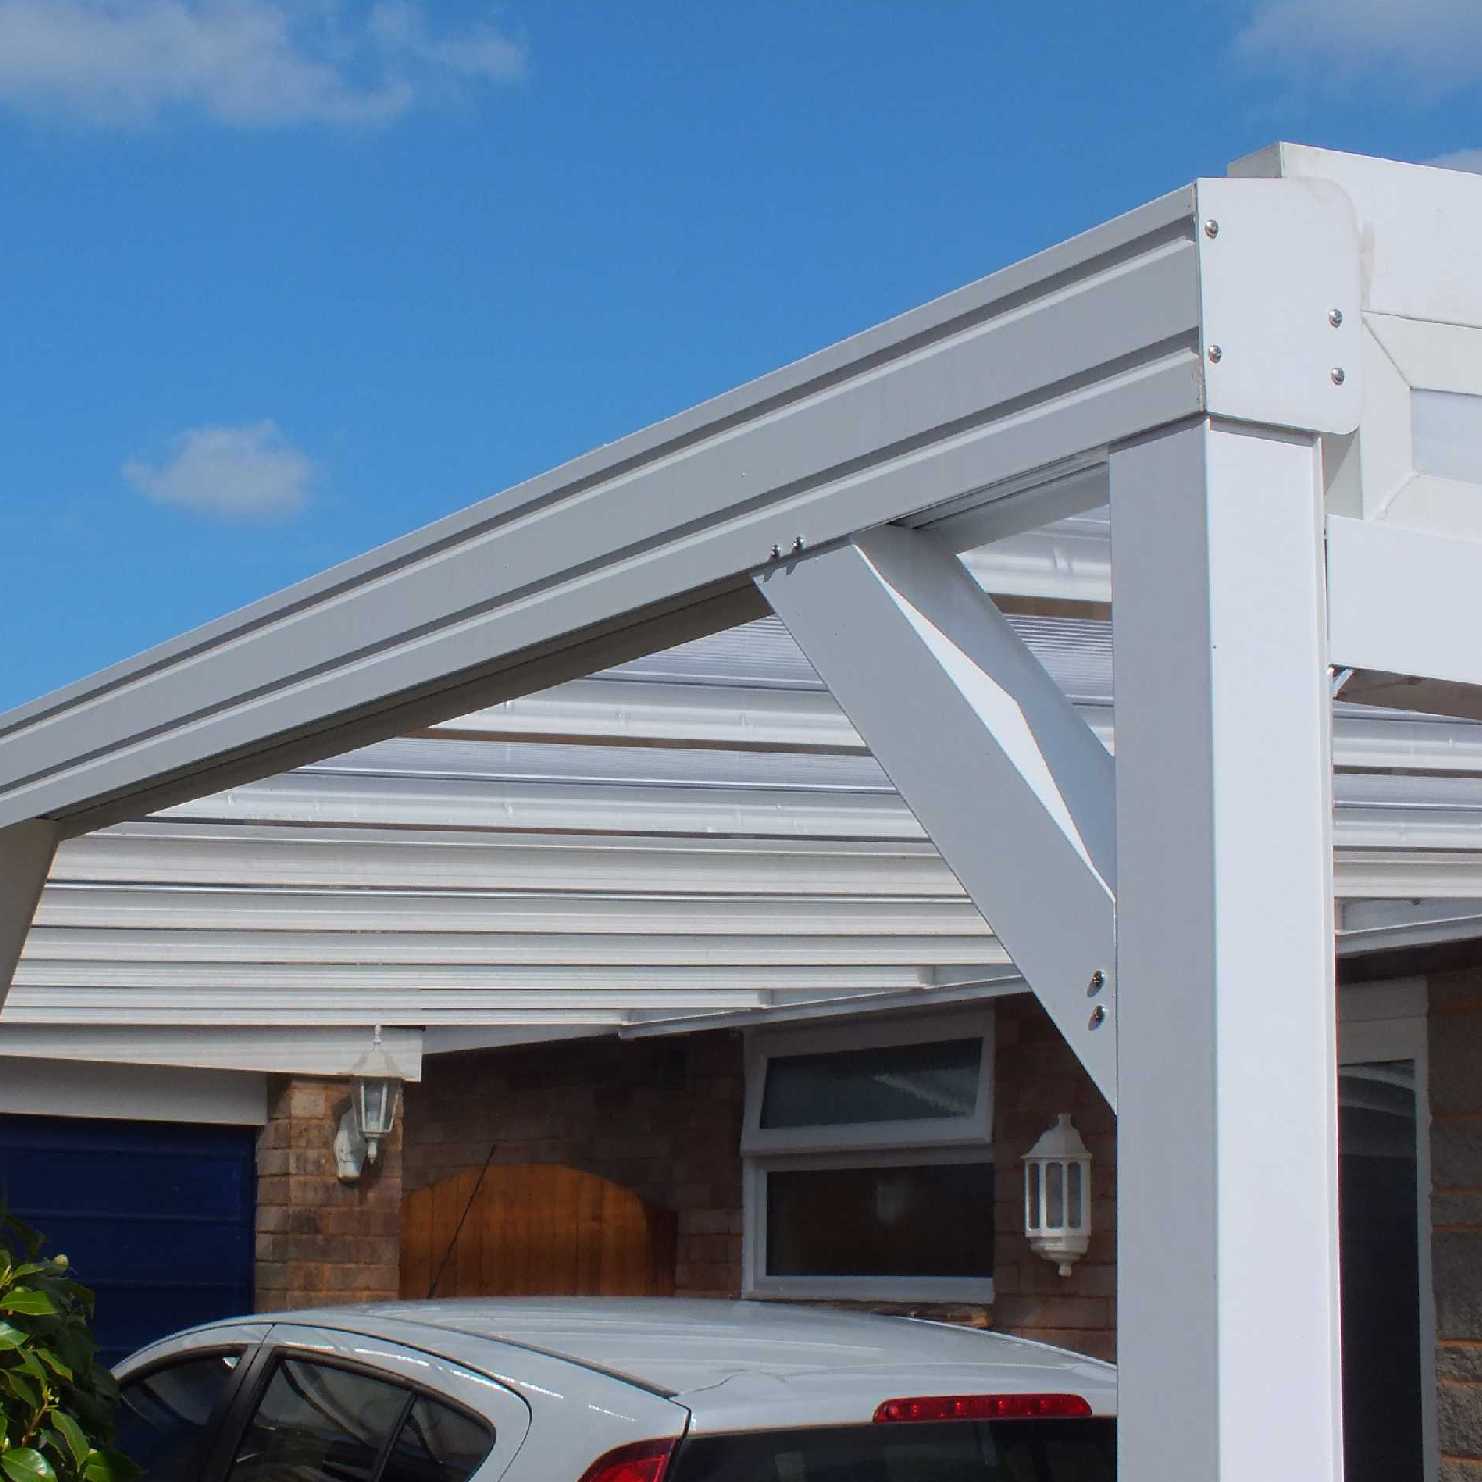 Great deals on Omega Smart Lean-To Canopy, White with 16mm Polycarbonate Glazing - 12.0m (W) x 3.0m (P), (5) Supporting Posts